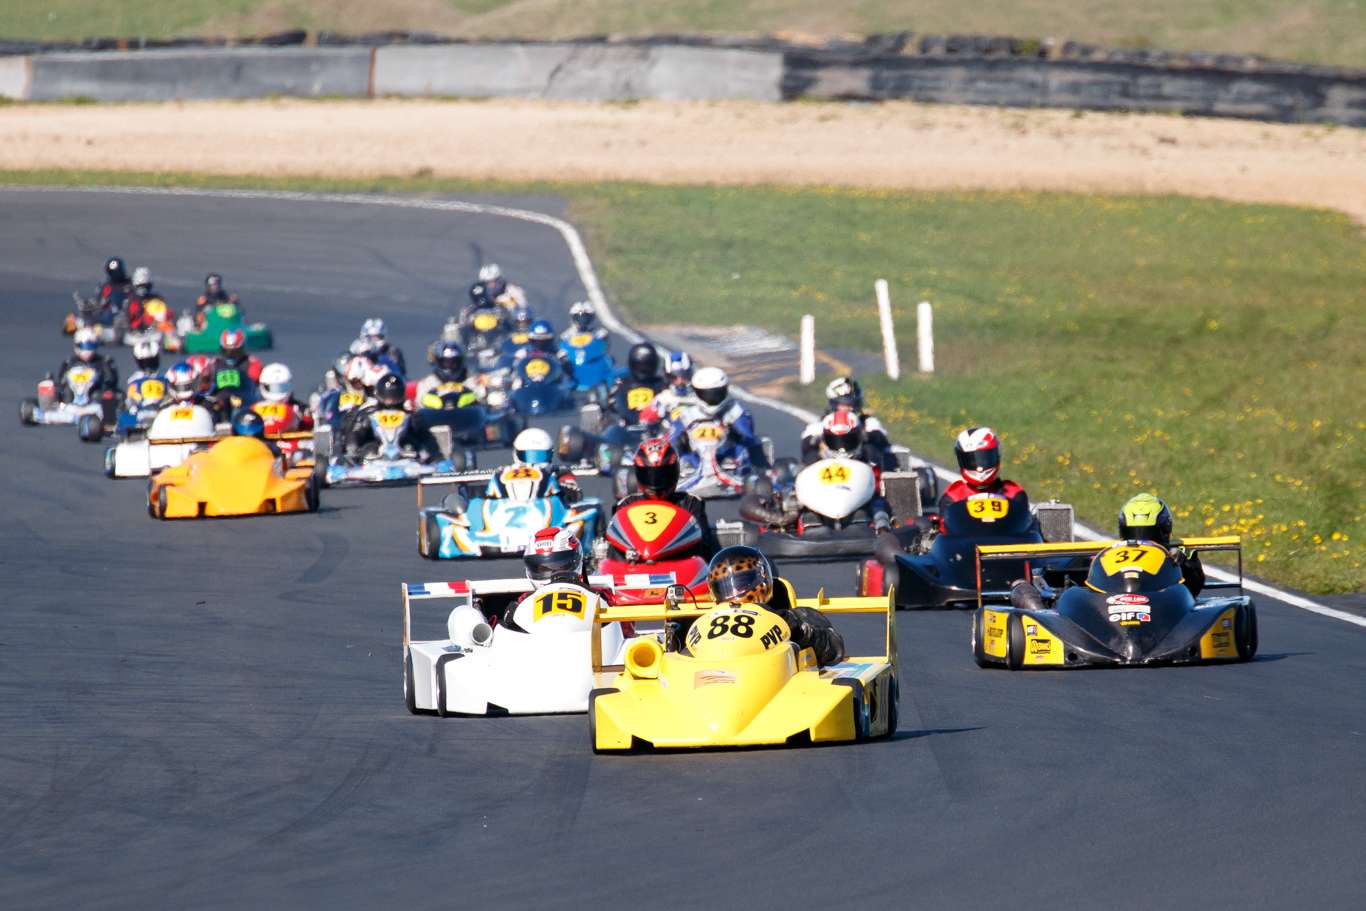 Superkart Grand Prix to be staged at Taupo